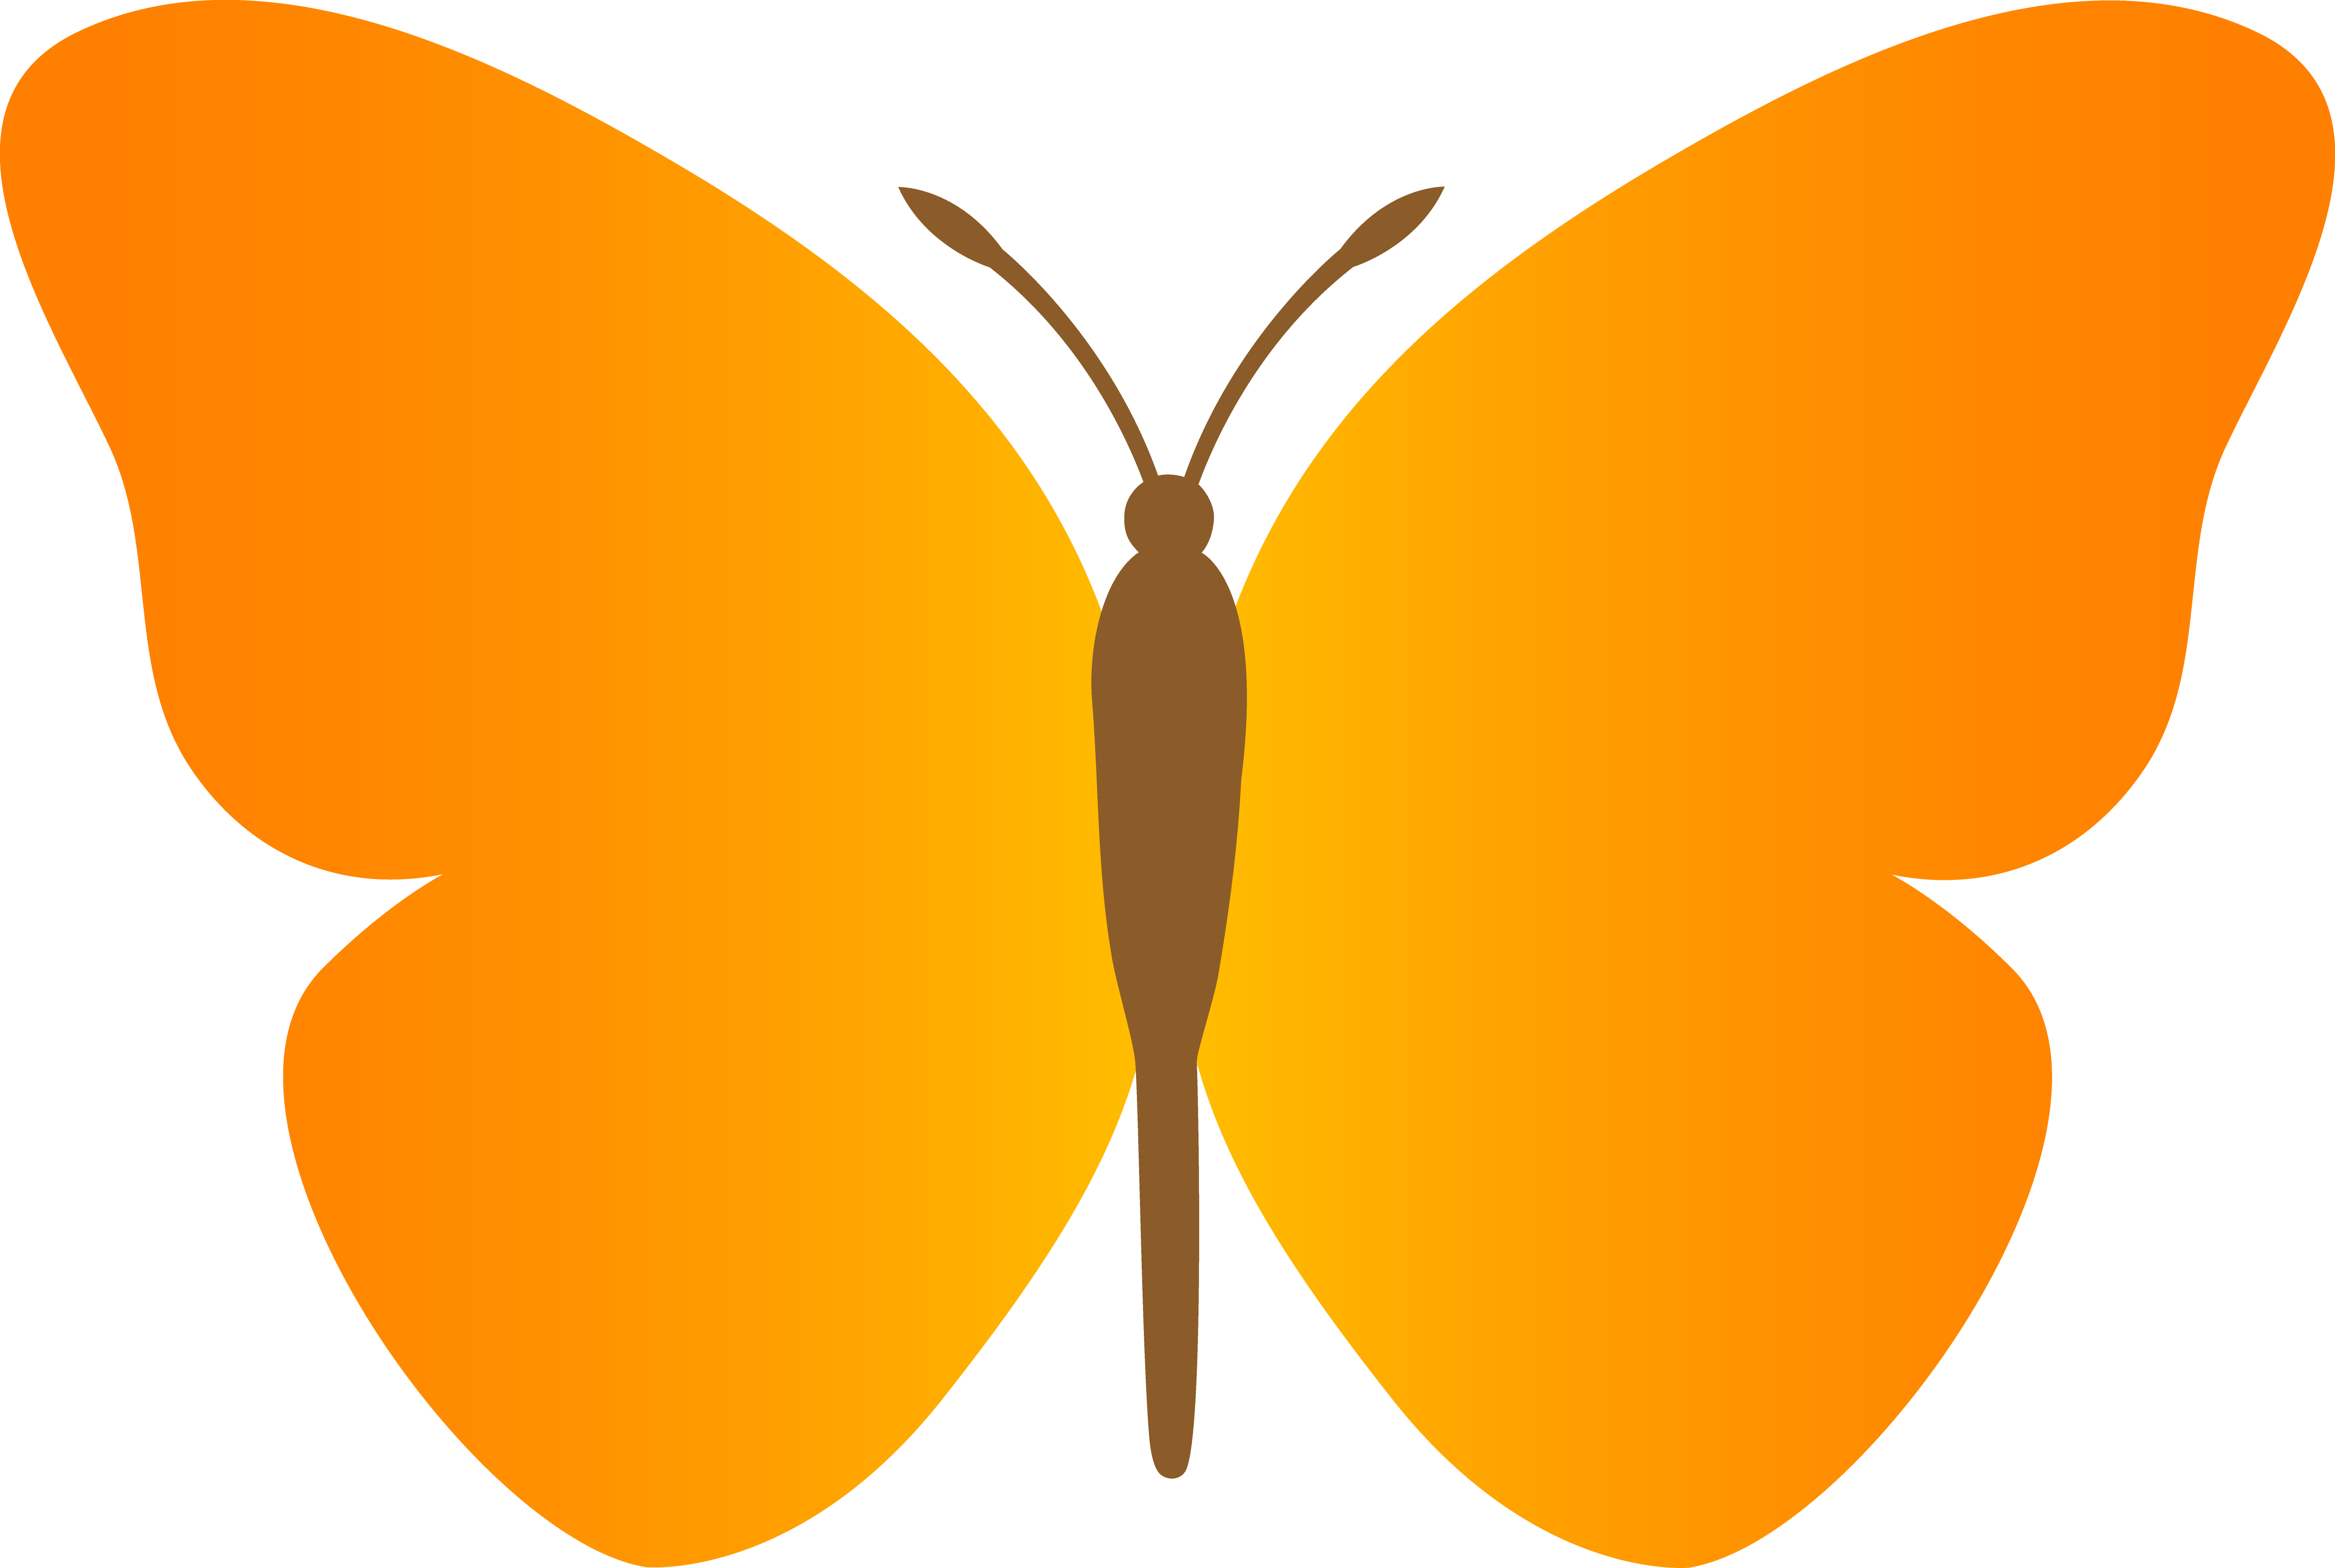 Animated Butterfly Vector - ClipArt Best